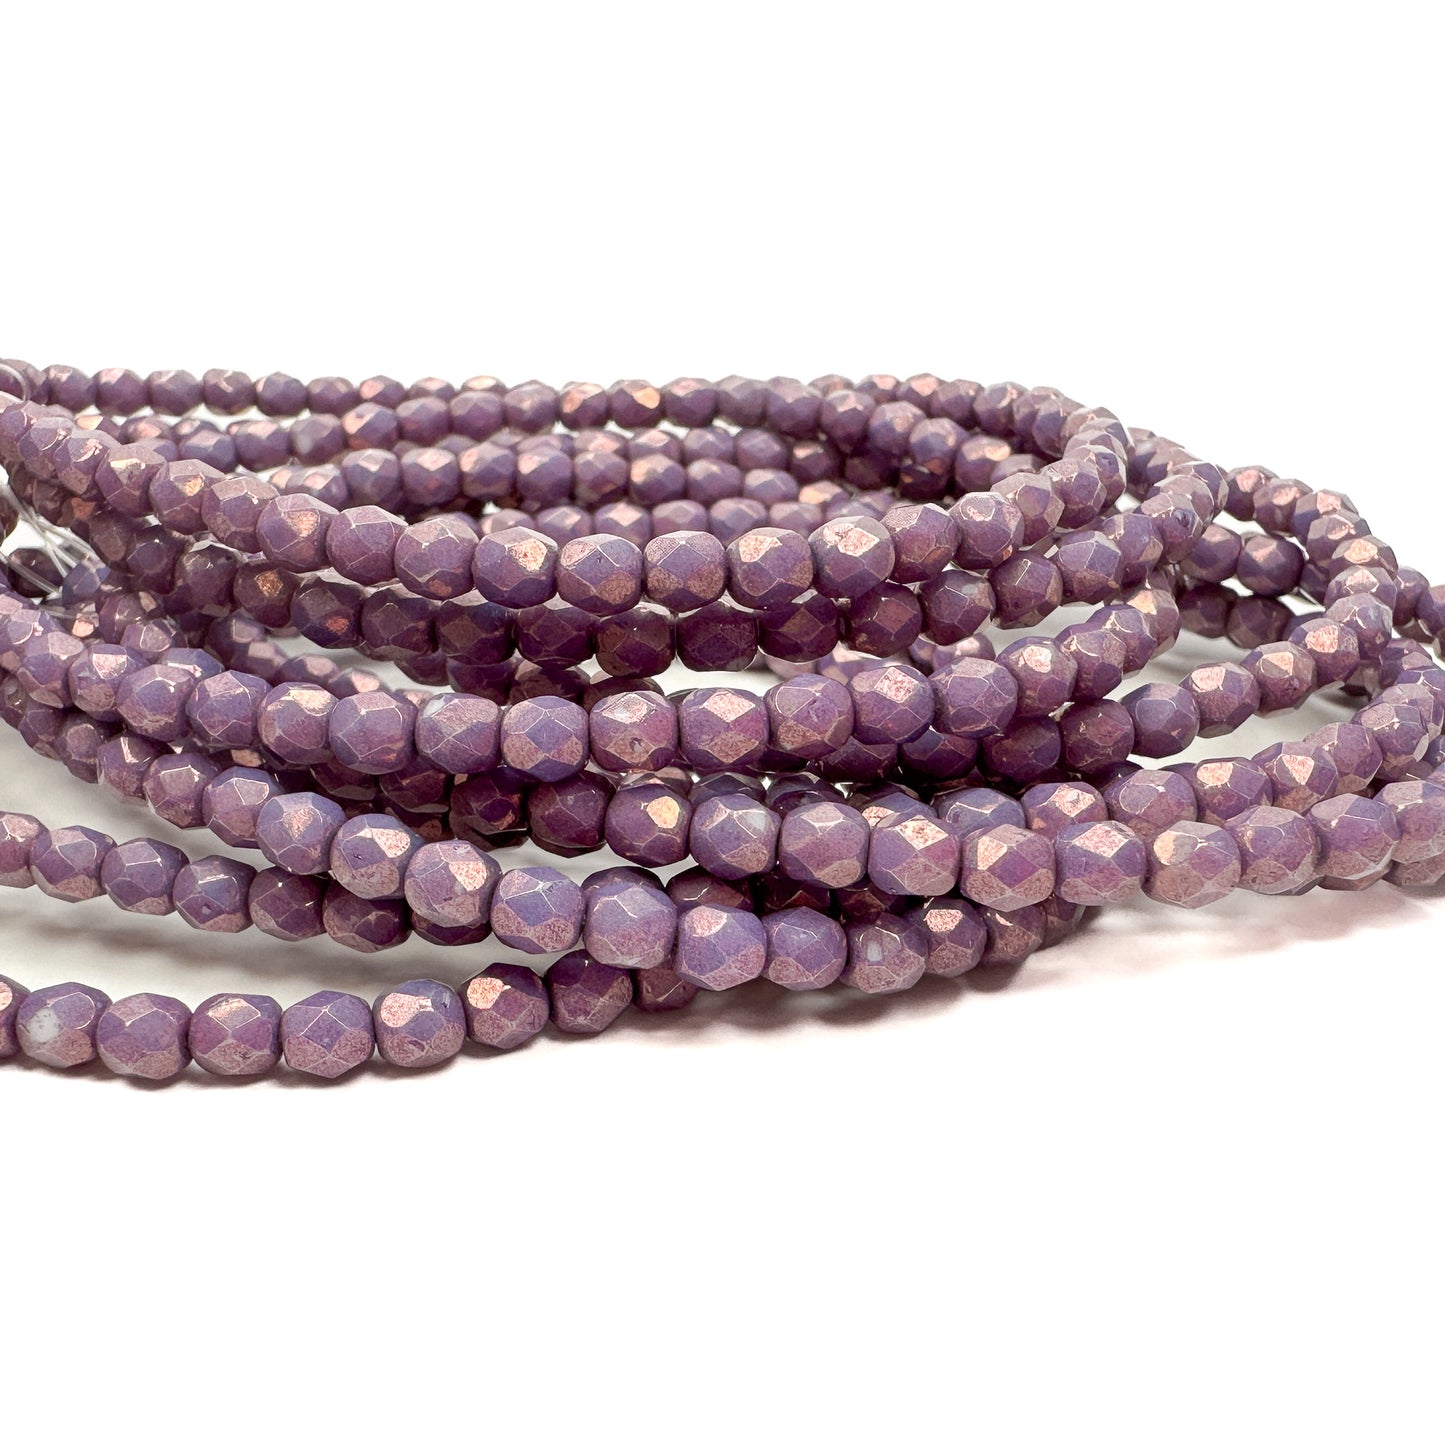 Purple Bronzey Opaque 4mm Faceted Glass Bead - 50 pcs.-The Bead Gallery Honolulu